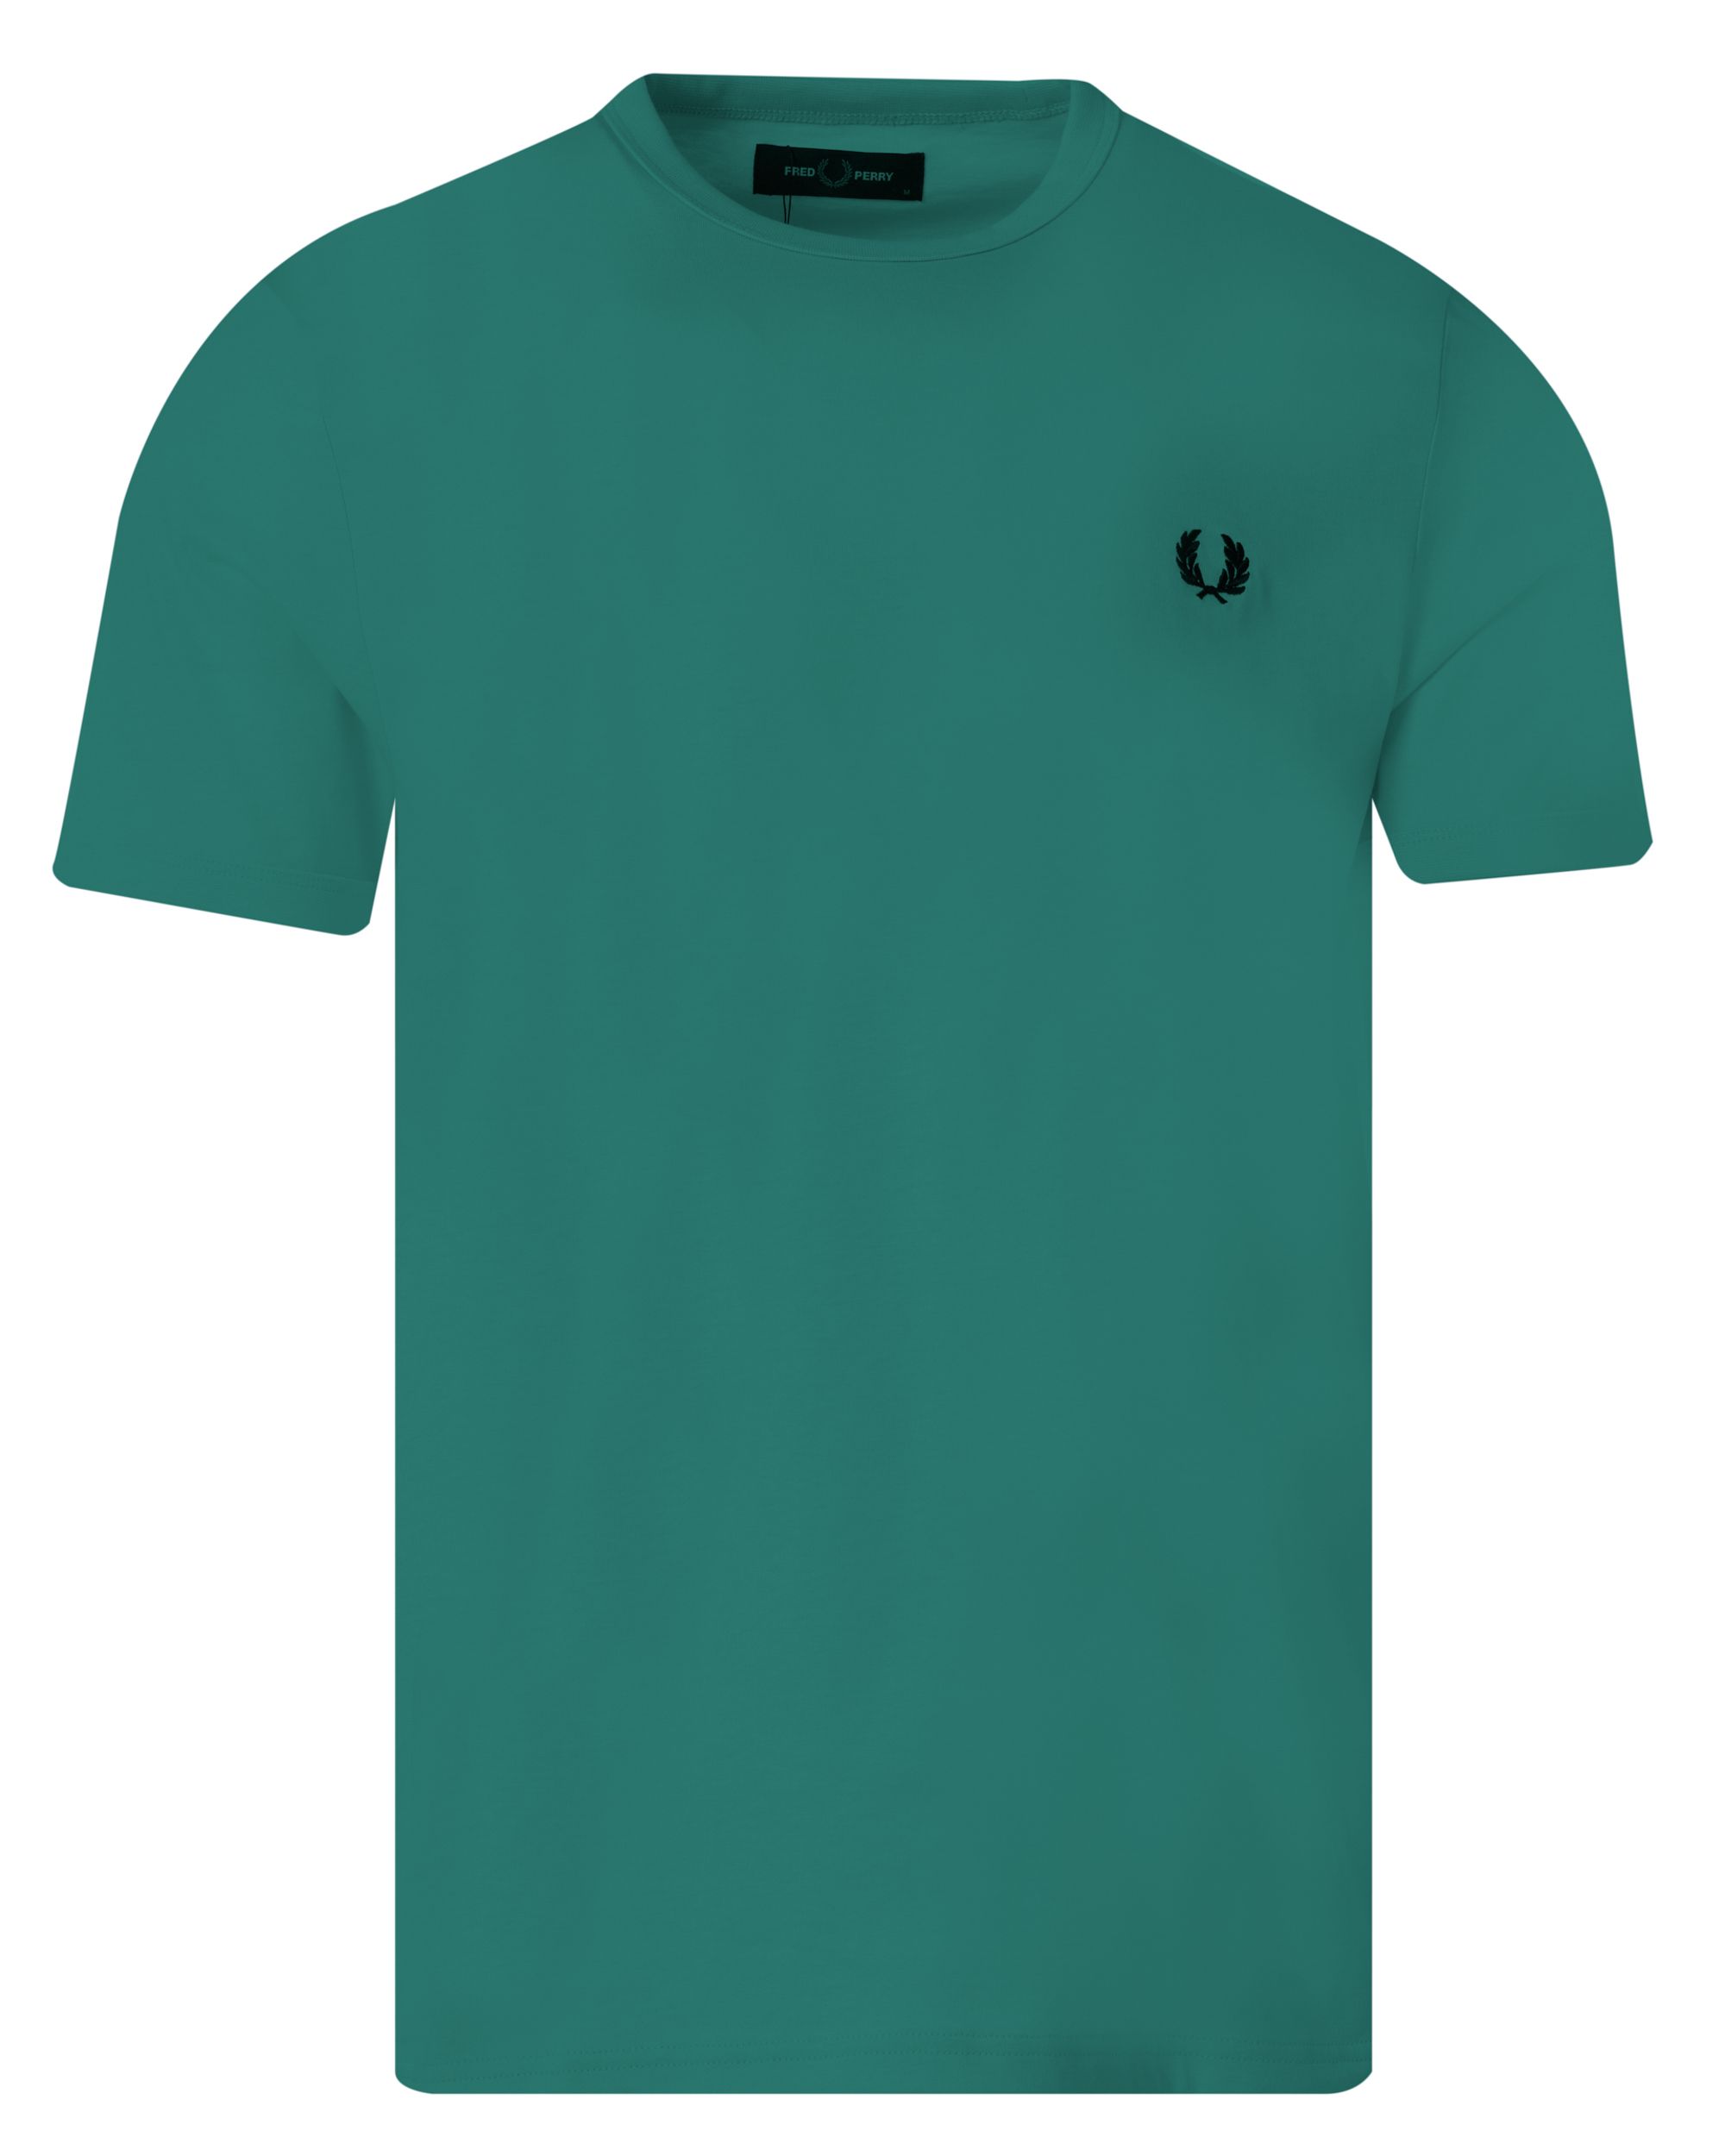 Fred Perry T-shirt KM Groen 083521-001-L